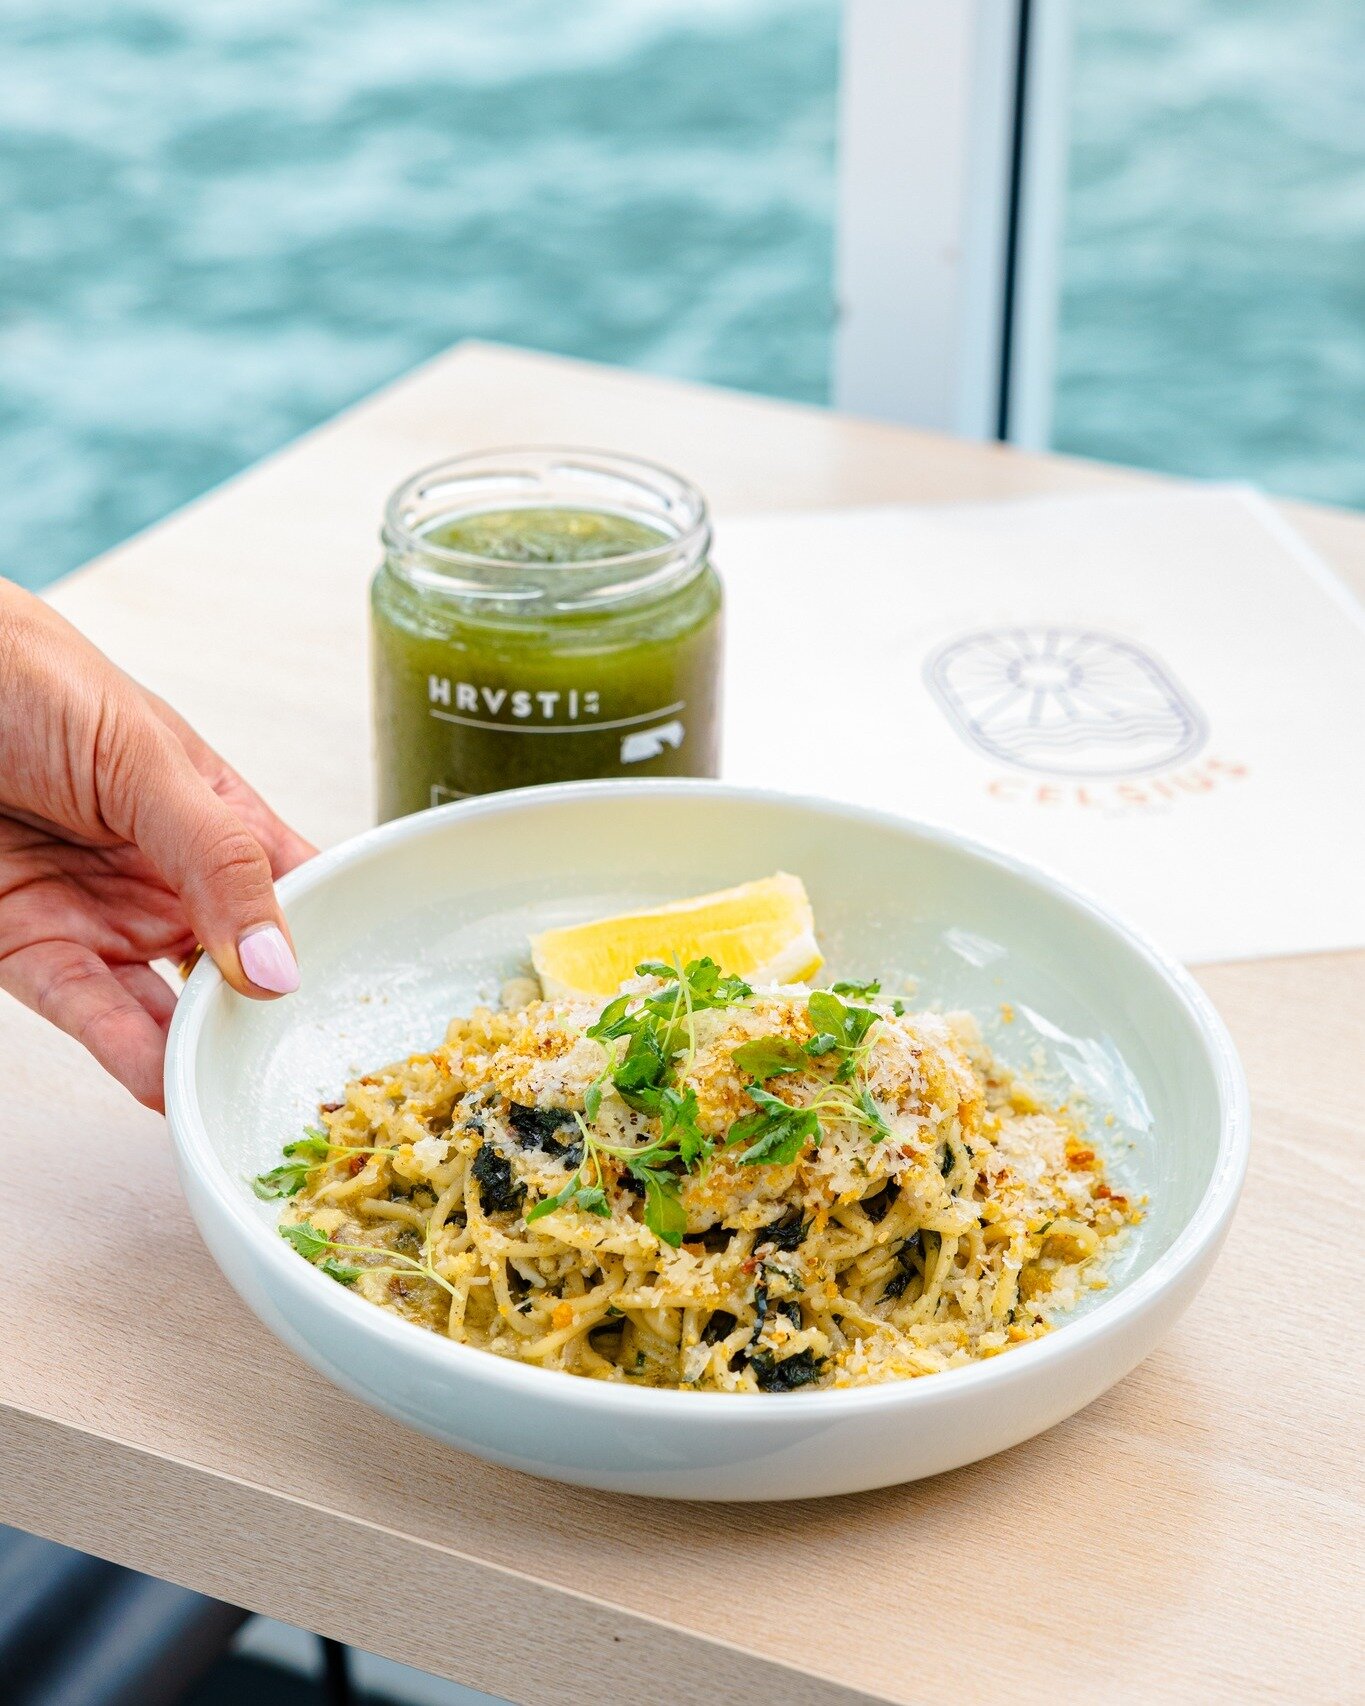 Roll out of bed and into our cafe for your daily dose of sunlight 🌞

Our Spanner Crab Spaghetti Al Burro is a great choice if you don't know where to start 🦀 

#CelsiusCoffeeCo

#sydneycoffee #sydneycafe #coffeeshop #cafes #waterviews  #sydneybrunc